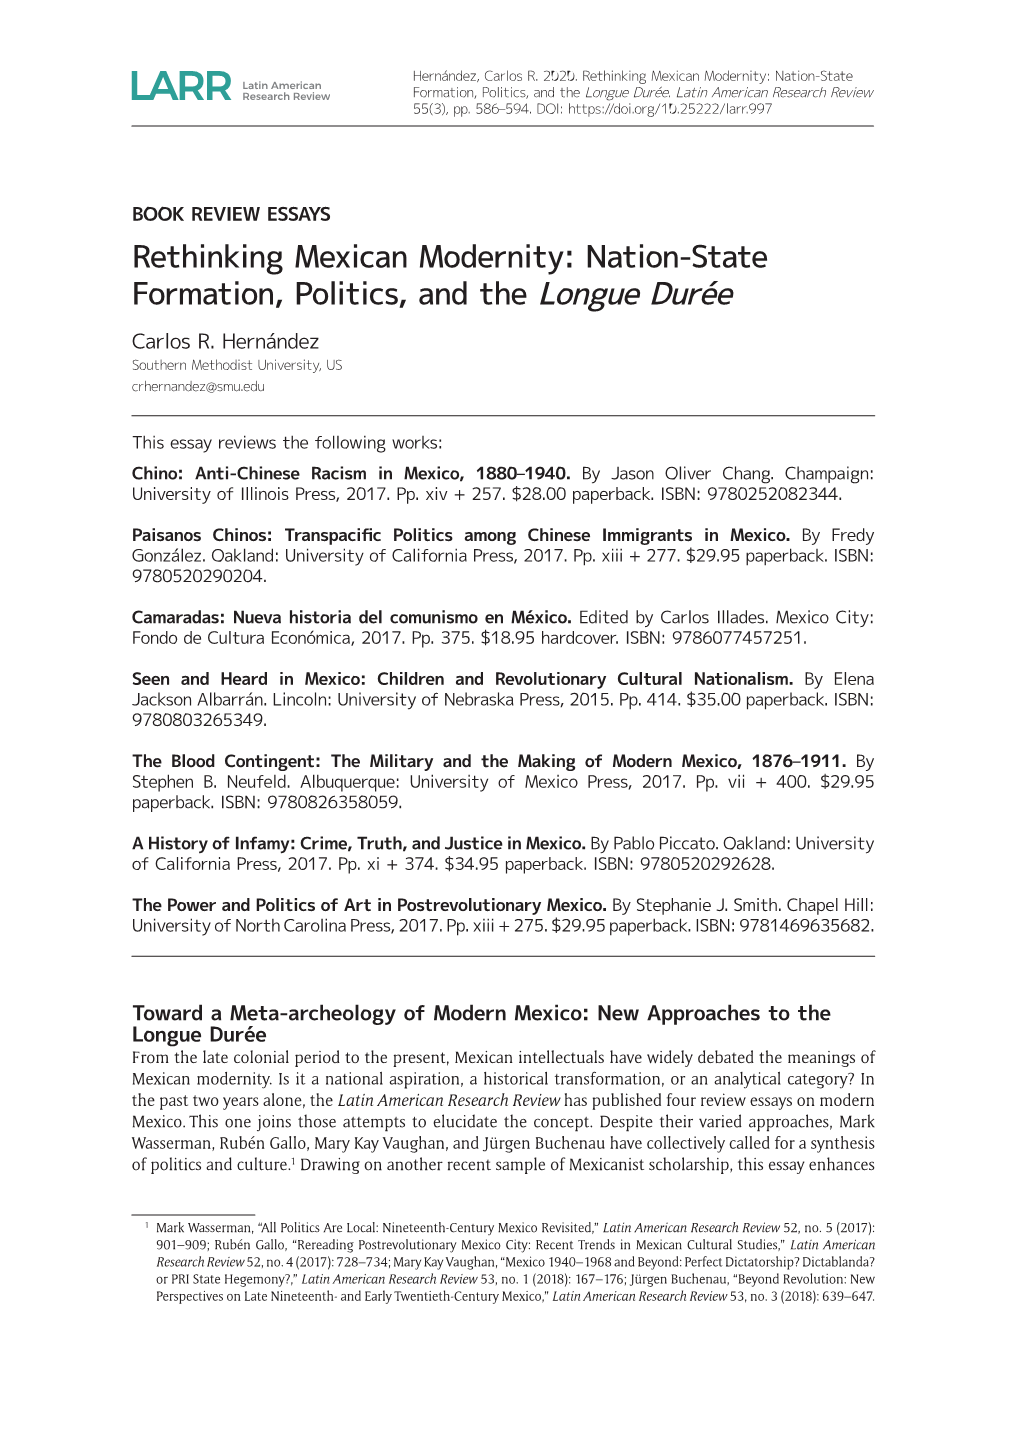 Rethinking Mexican Modernity: Nation-State Formation, Politics, and the Longue Durée